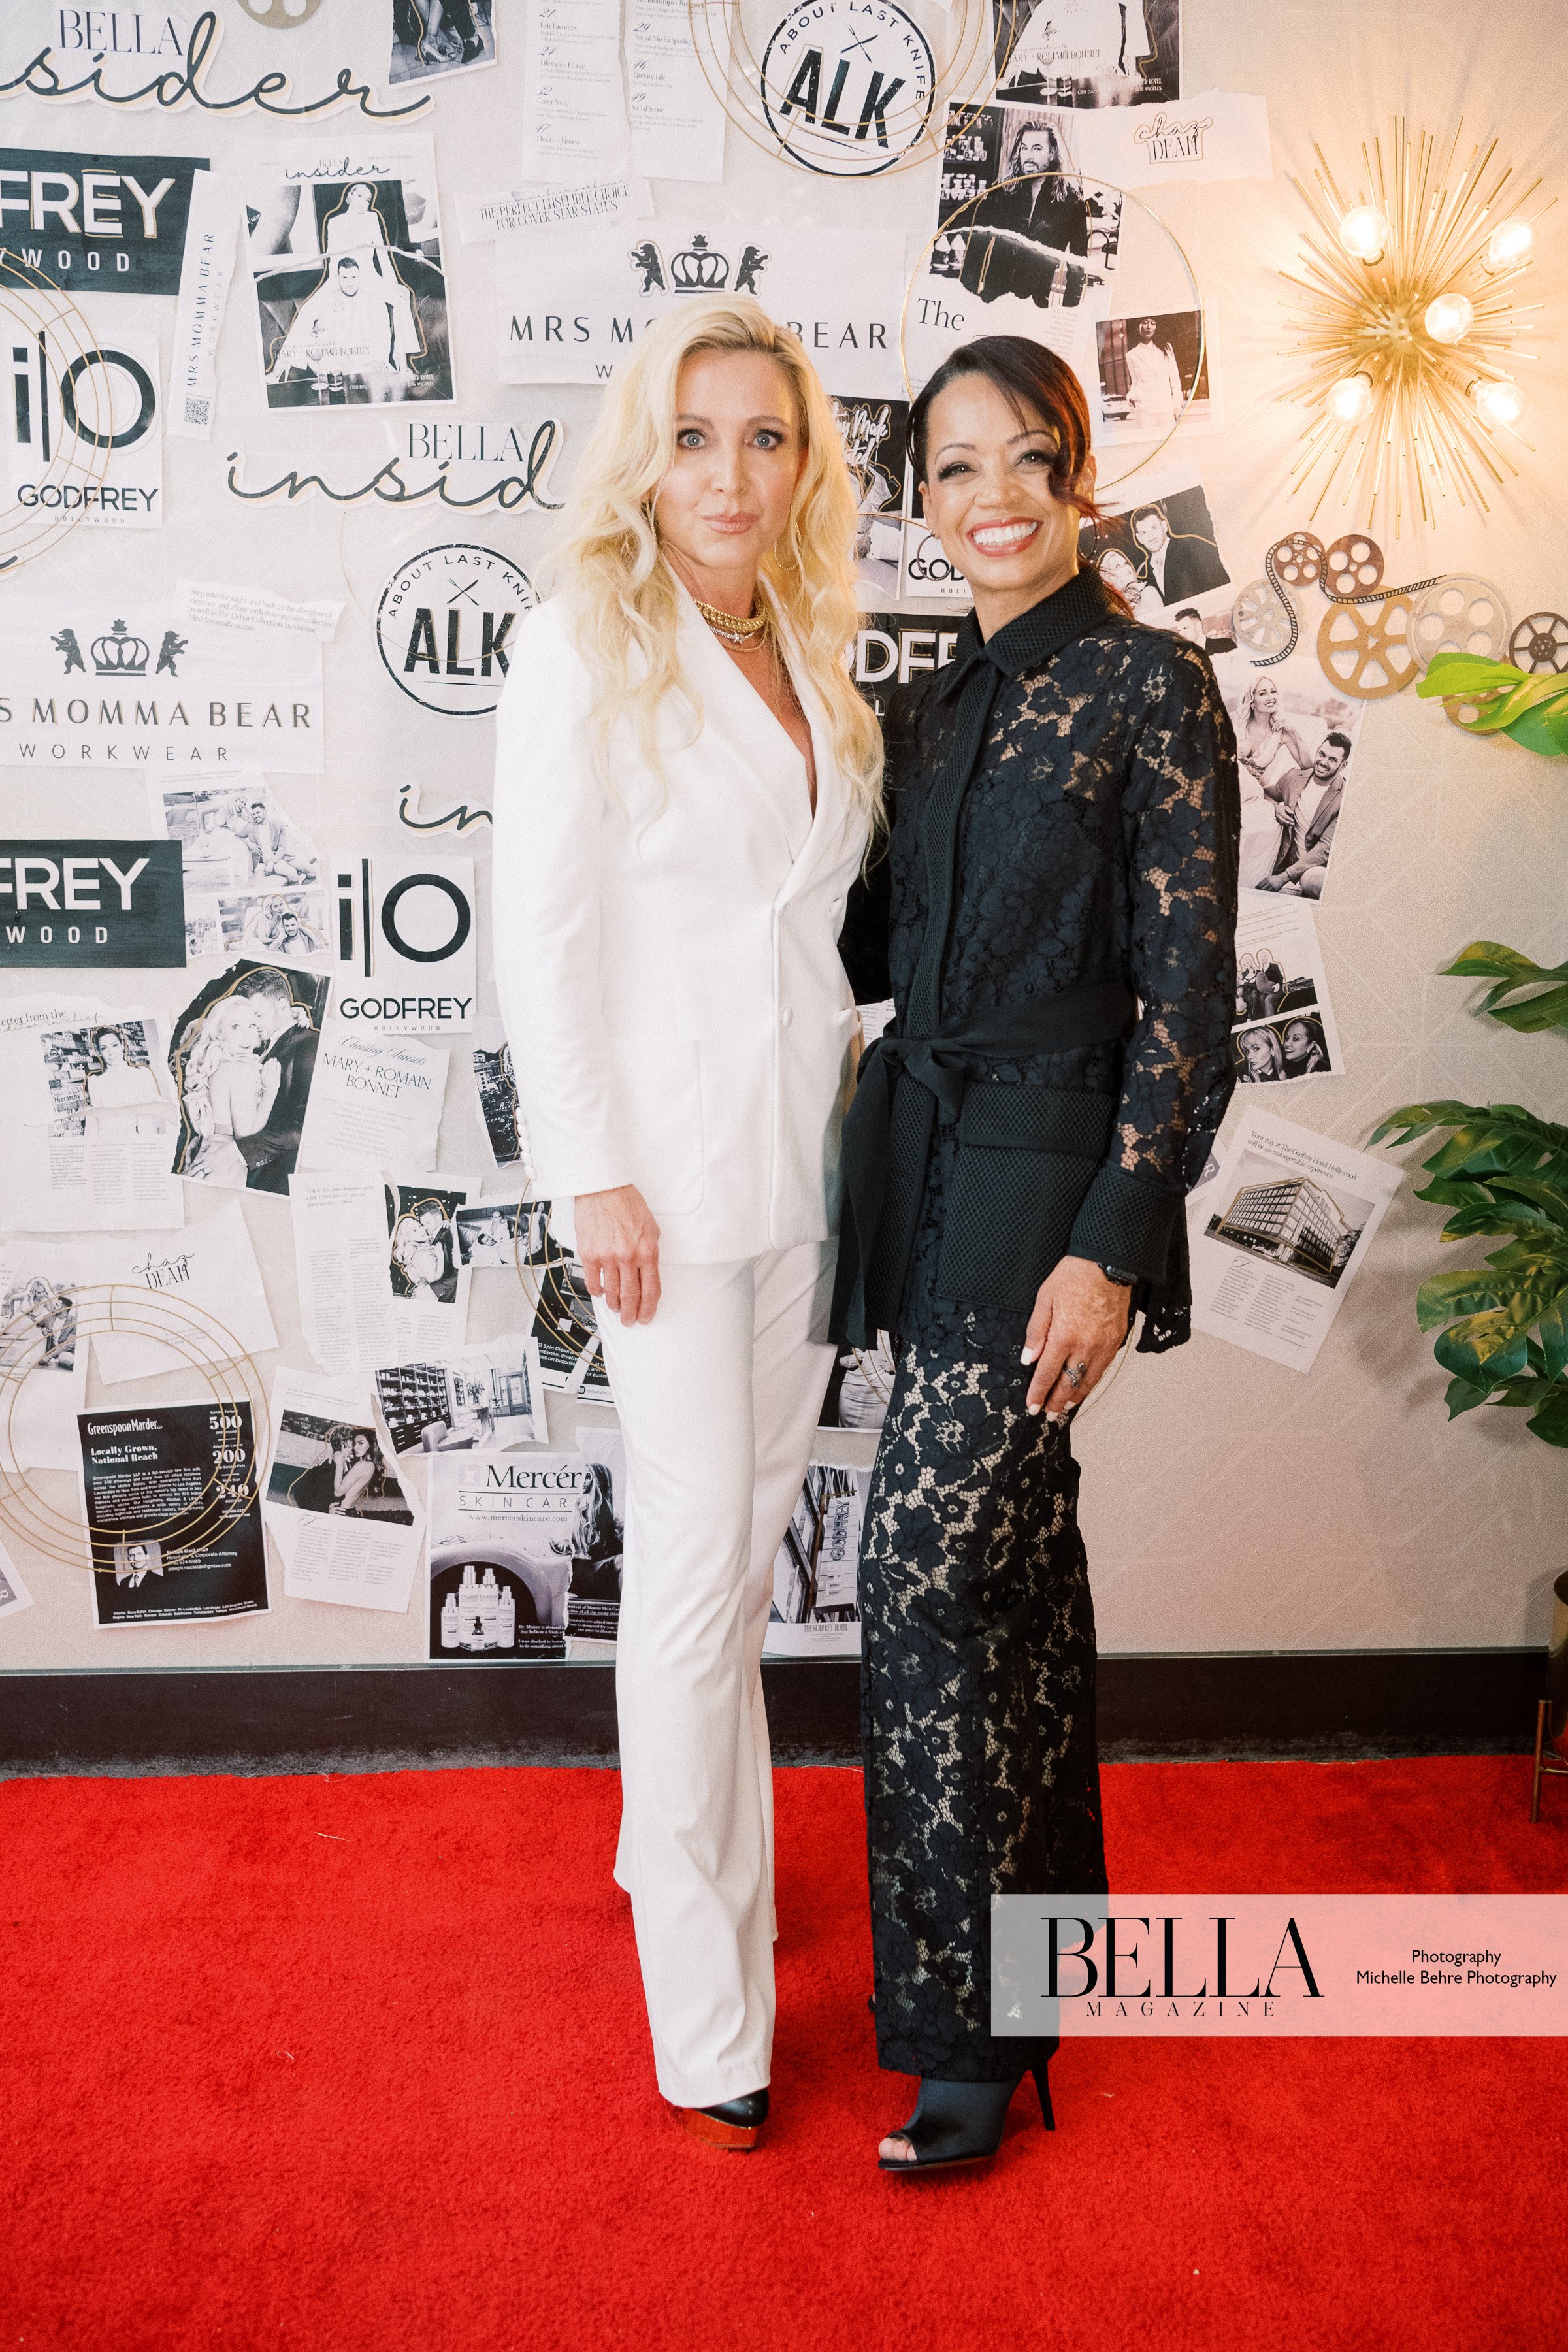 Michelle-Behre-Photography-BELLA-Magazine-Hollywood-Cover-Party-33.jpg